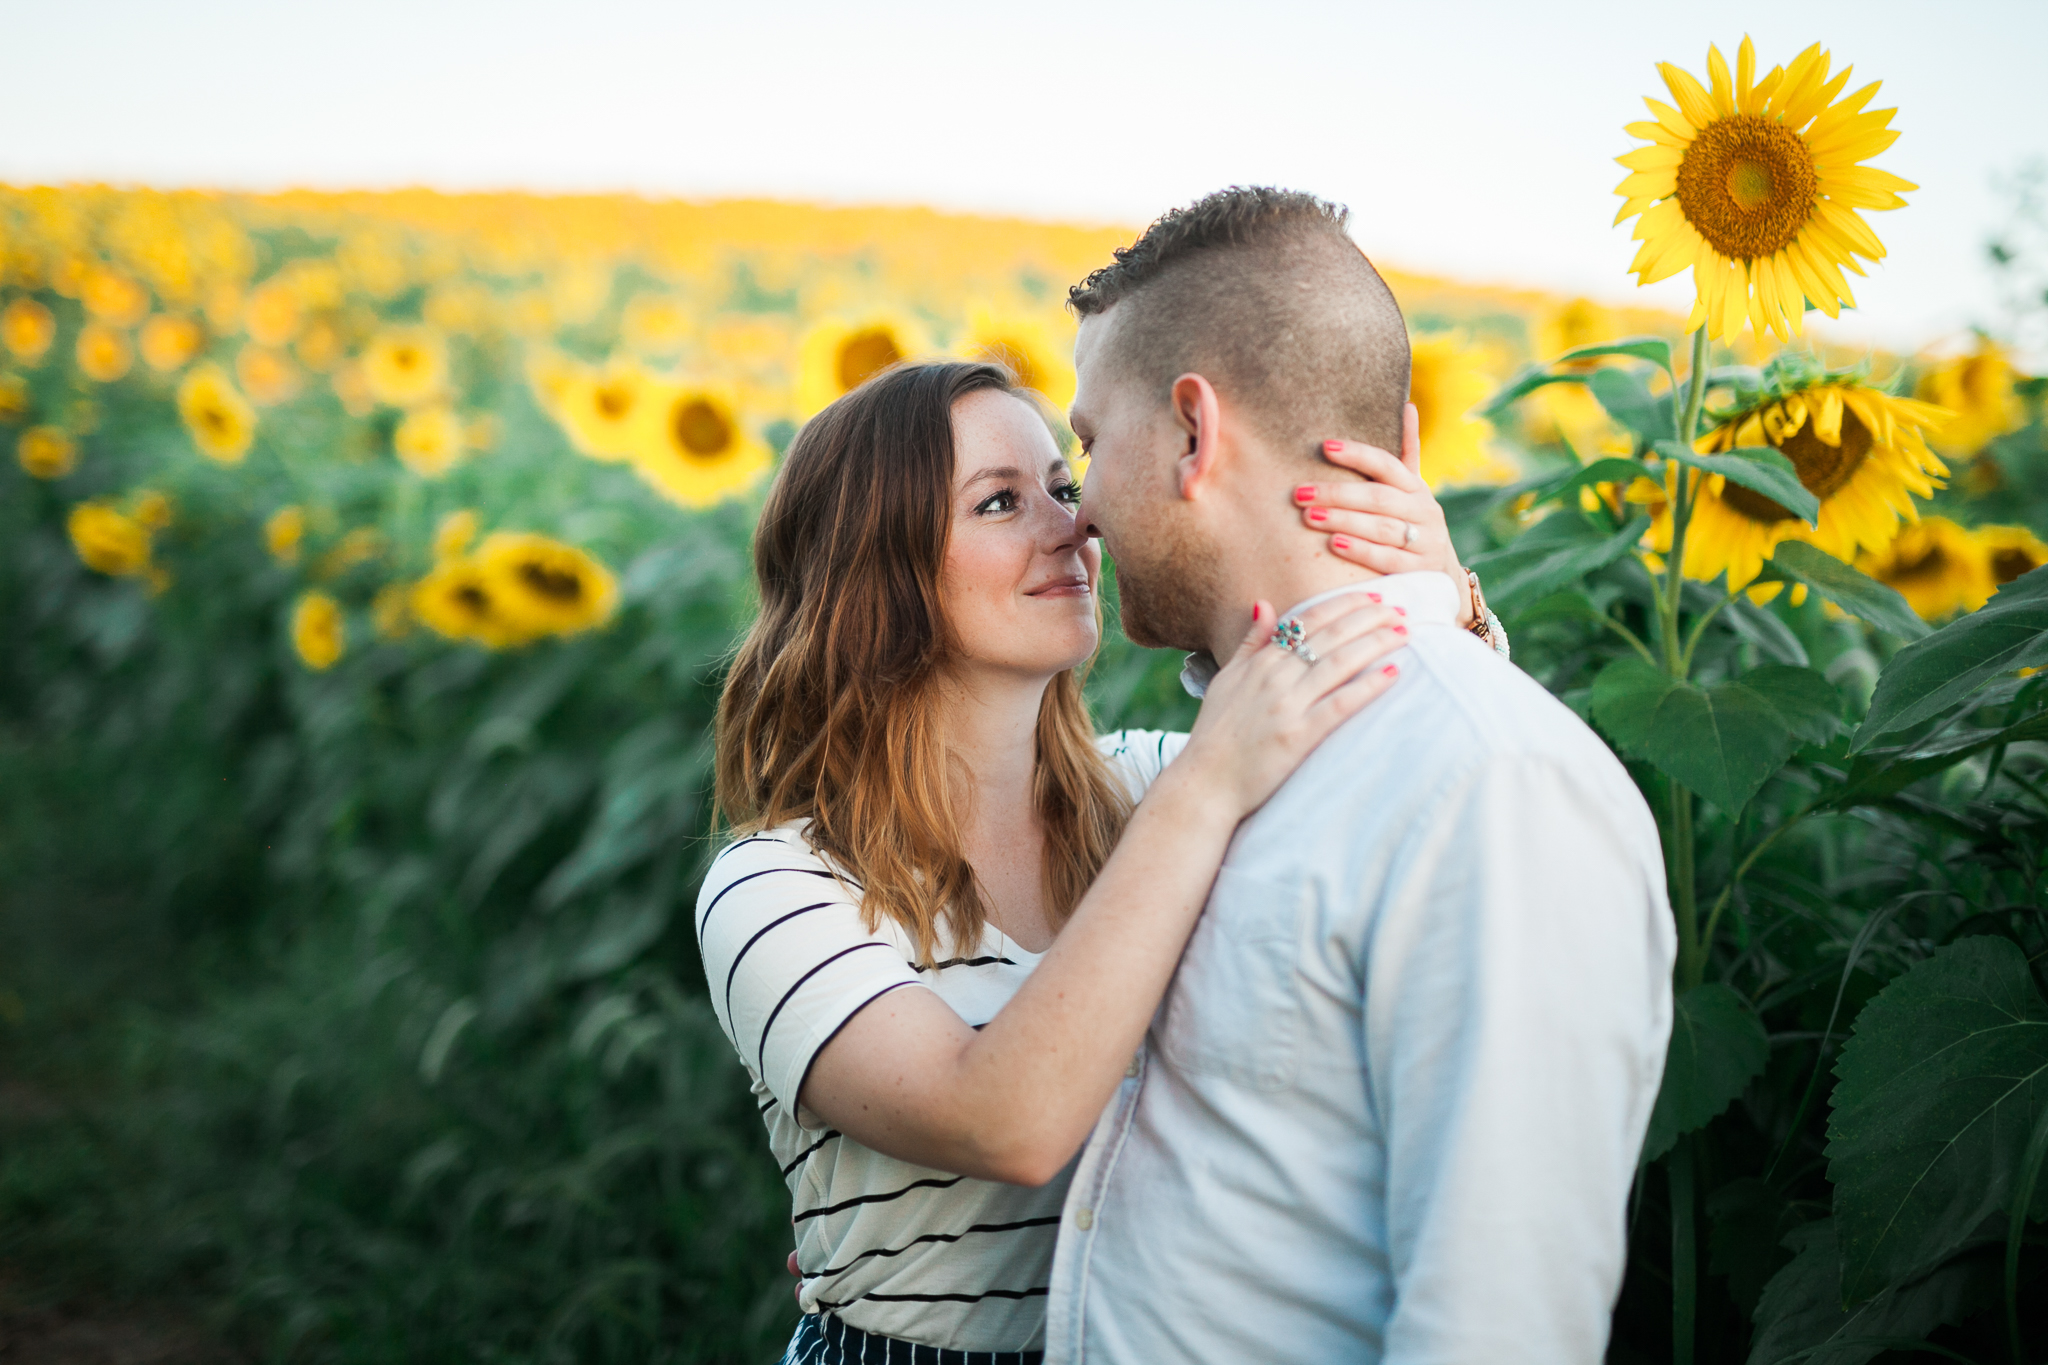 Pope-Farms-Sunflower-Engagement-Session-Madison-Wisconsin_034.jpg